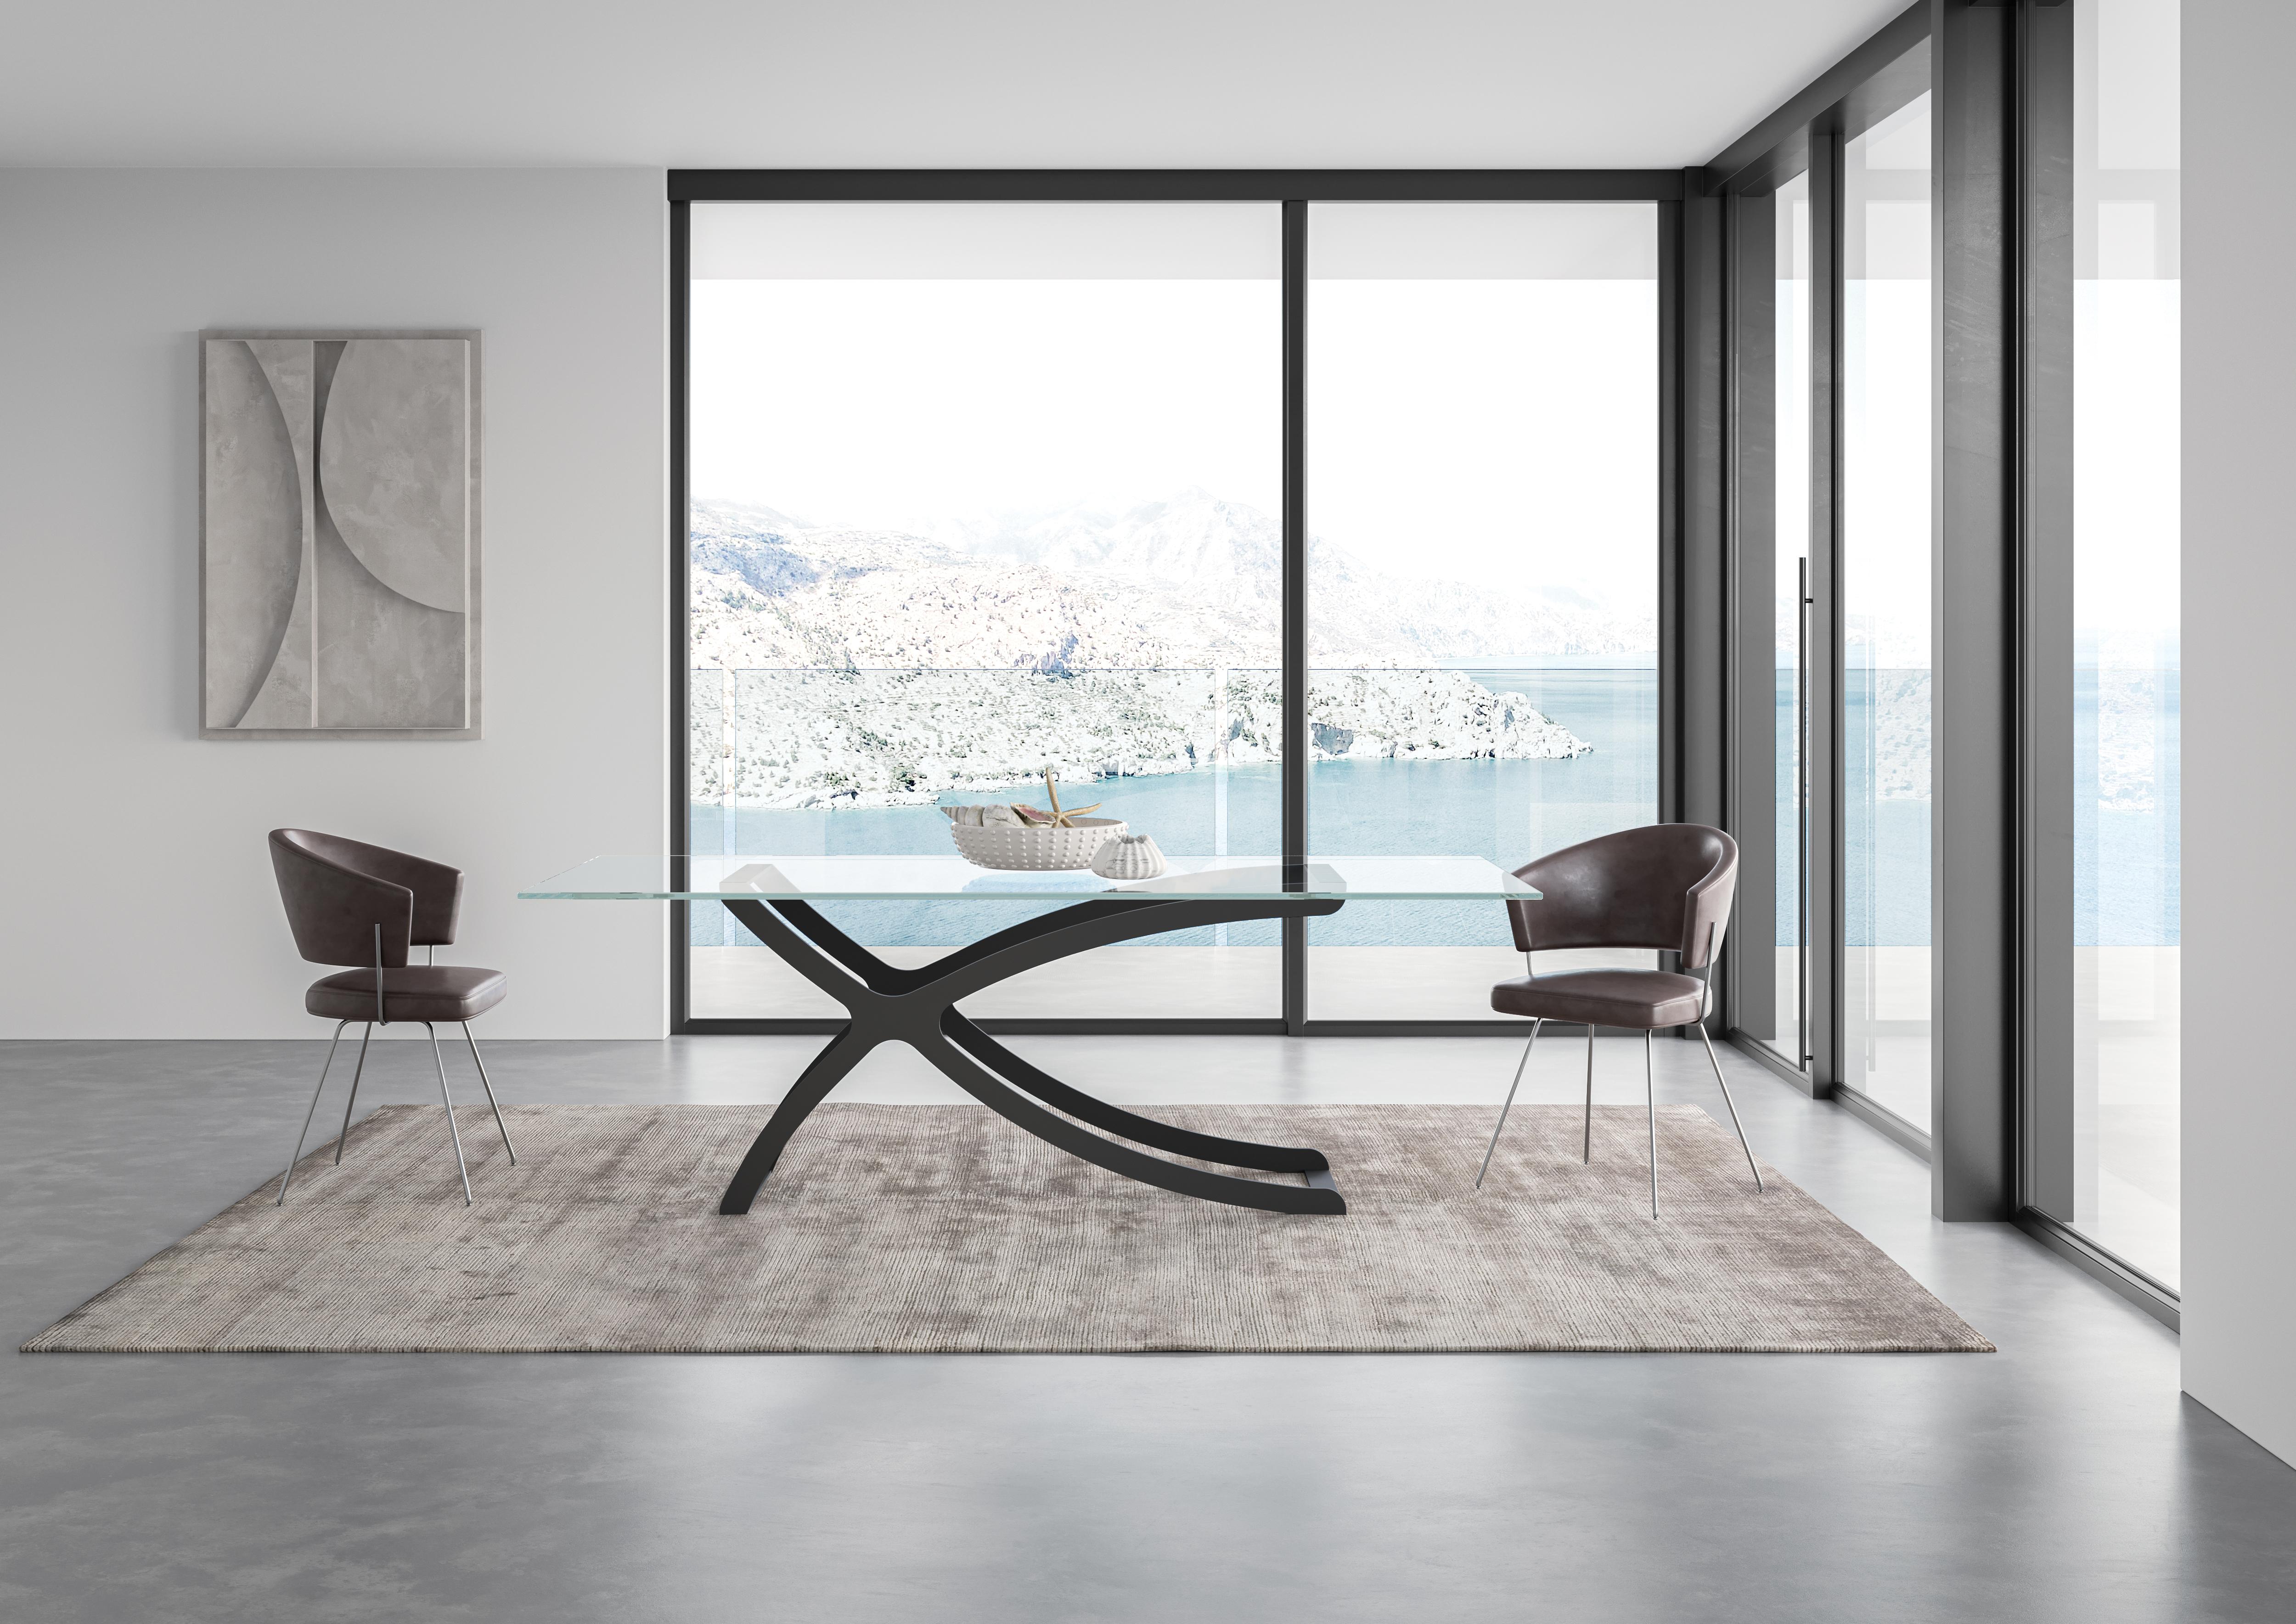 Apollo Dining Table by Chinellato Design
Dimensions: W 250 x D 120 x H 72 cm
Materials: Top: Extra Clear Tempered Glass
Base: Matte Black Varnished

The base, crafted from worked and welded steel, is available in Chabin Gold or Matte Black Paint